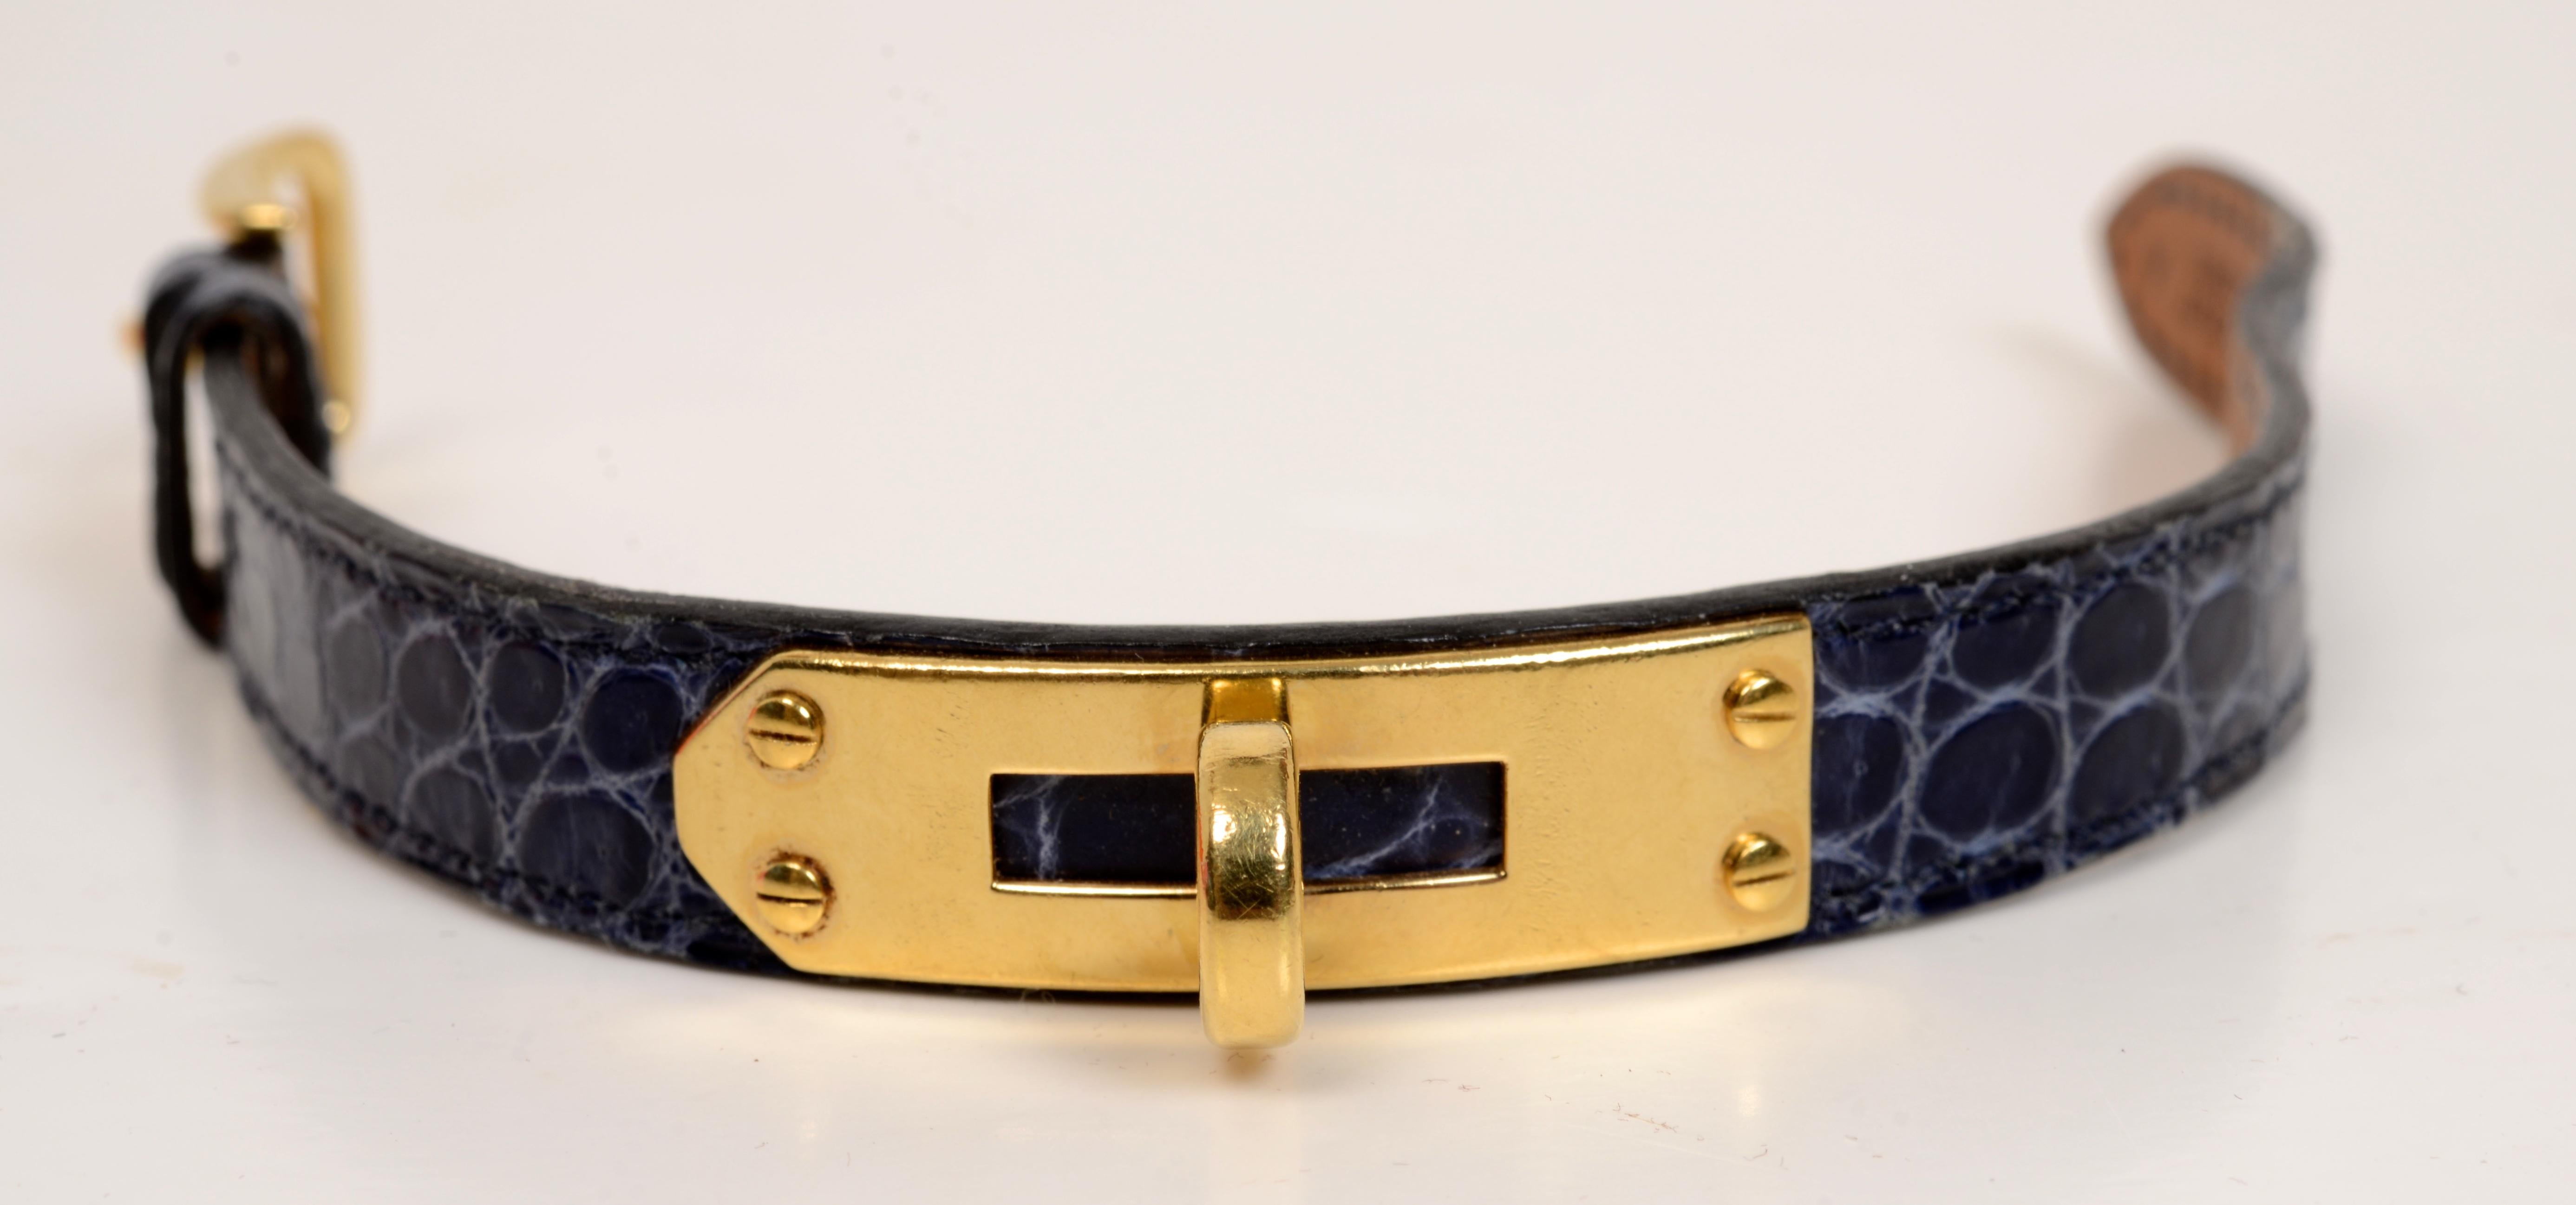 A Hermès watchband for the Kelly watch with 18K gold plated hardware and navy crocodile band. Stamped: Hermès, Swiss Placque D.
N.P. Trent has been a respected name in antiques for over 30 years with a large rcollection of antique and vintage